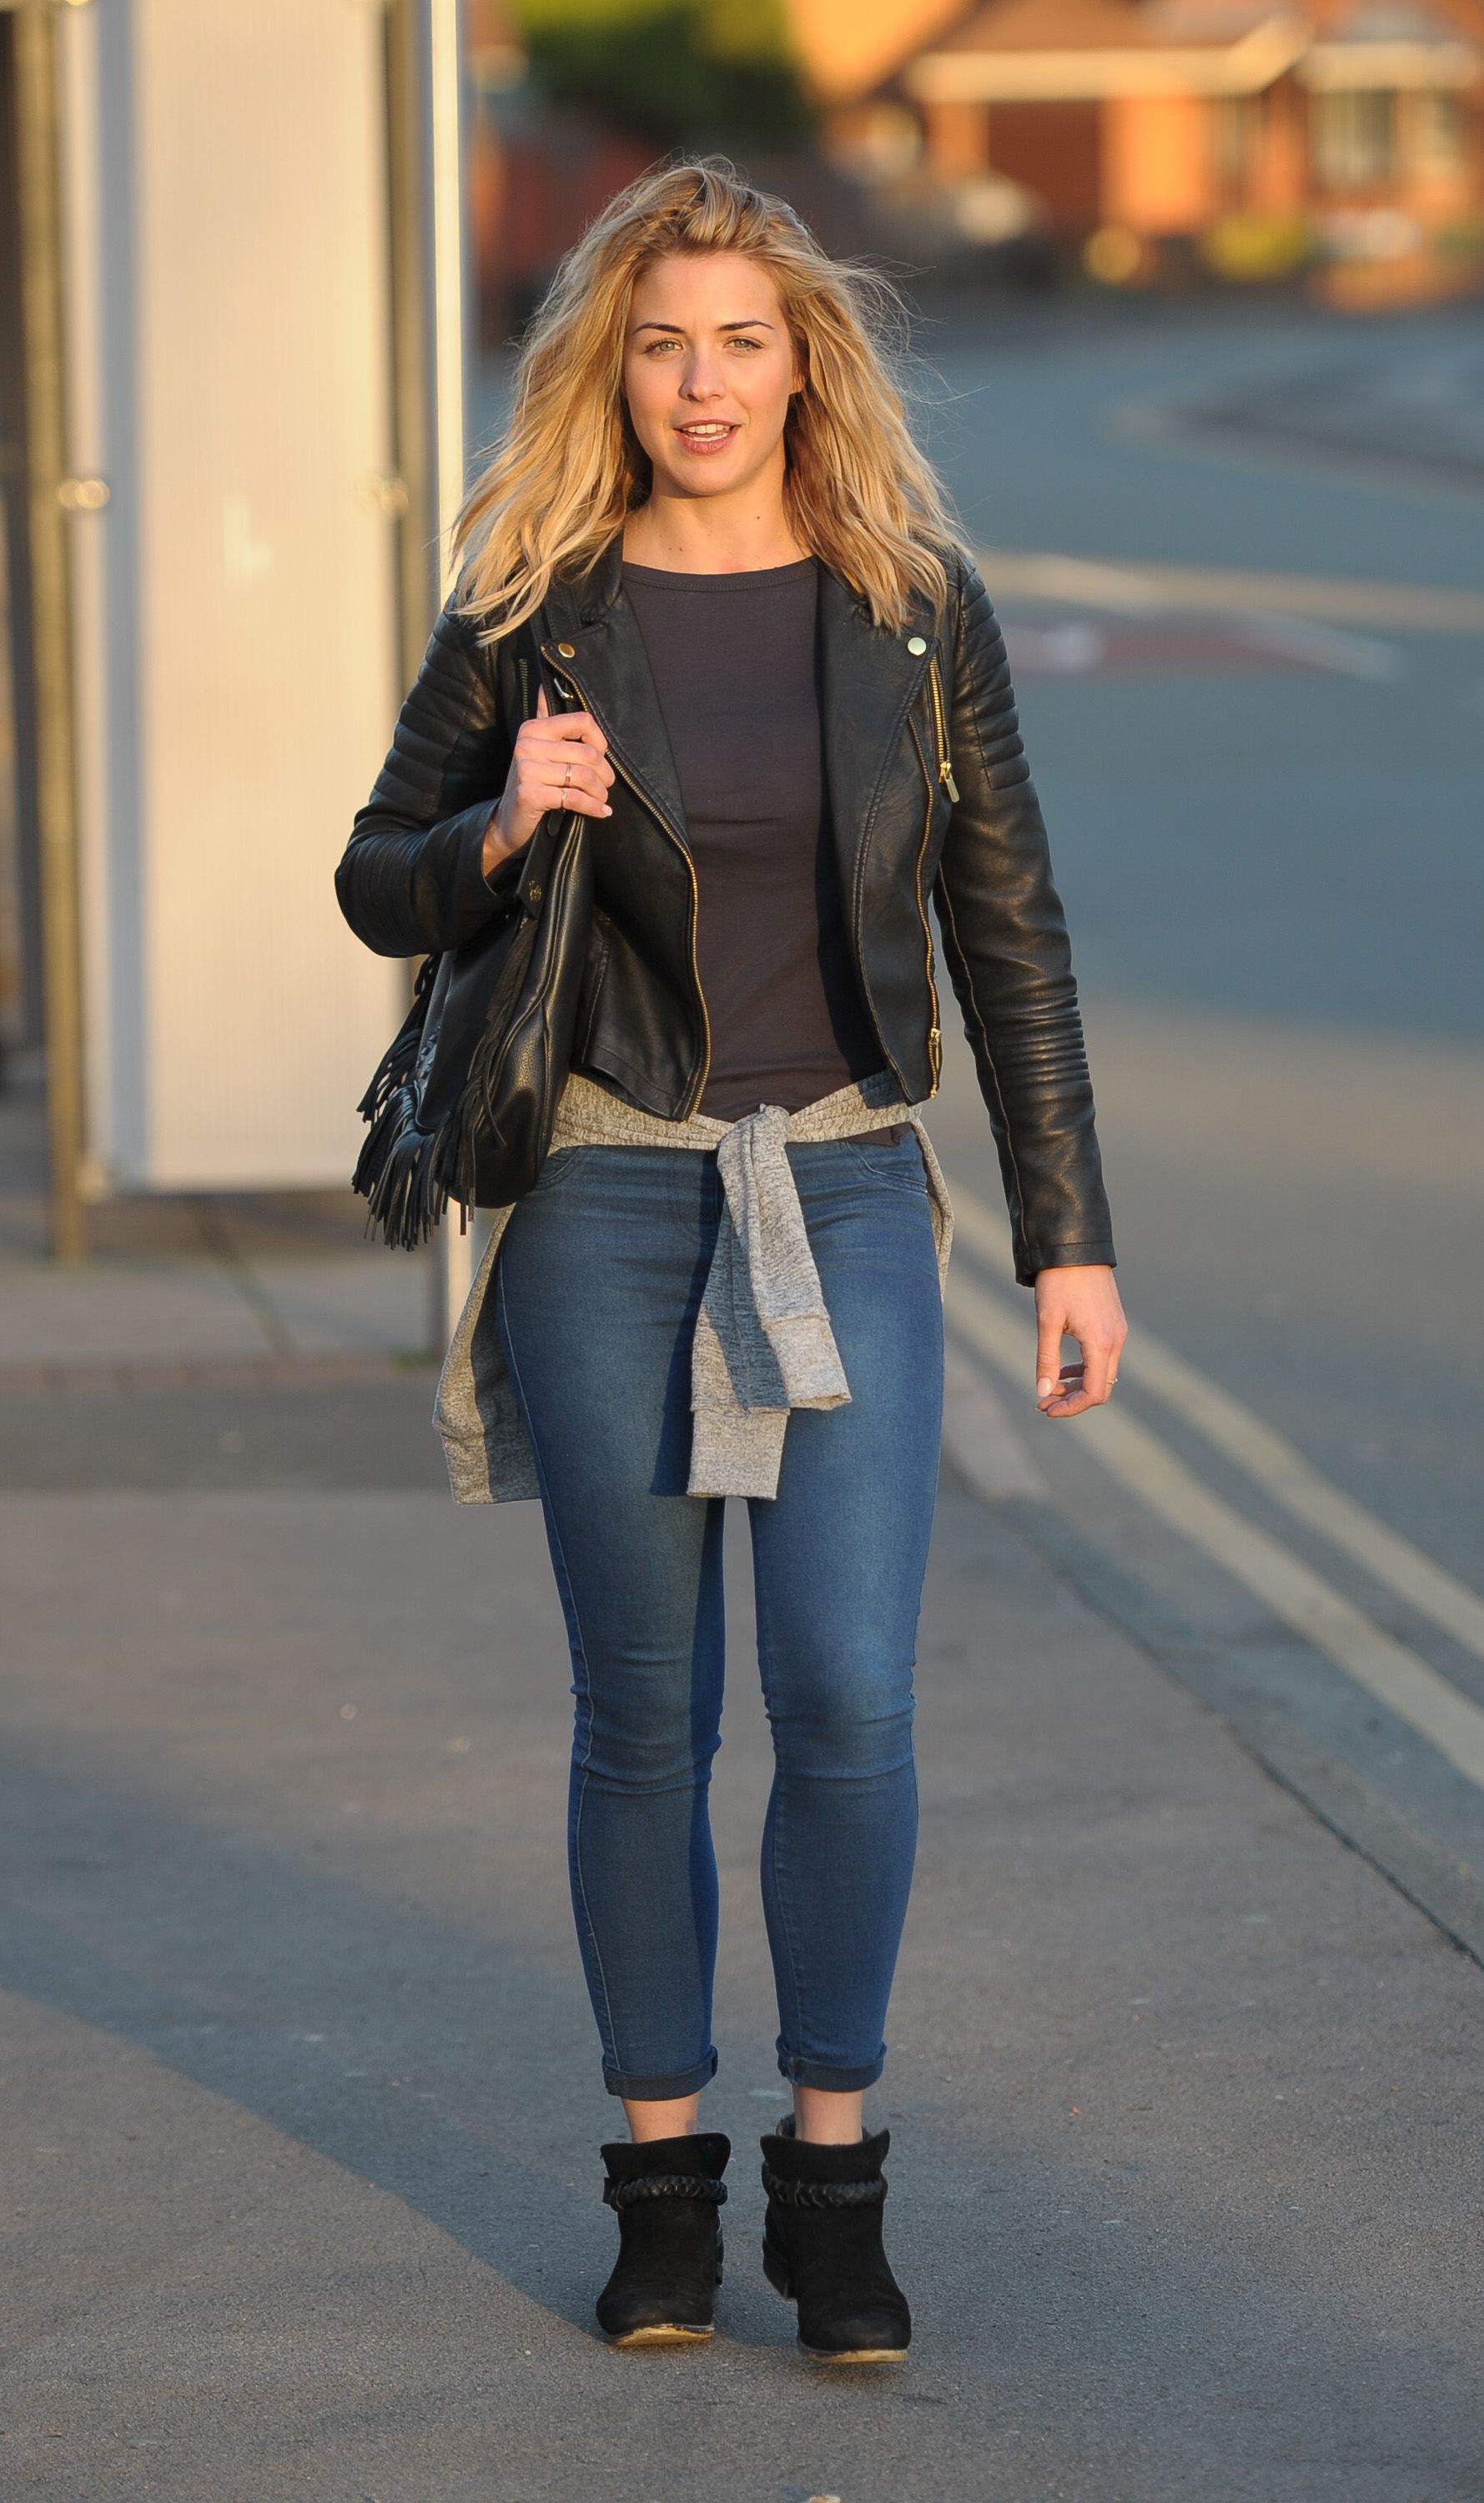 Gemma Atkinson out and about in Manchester